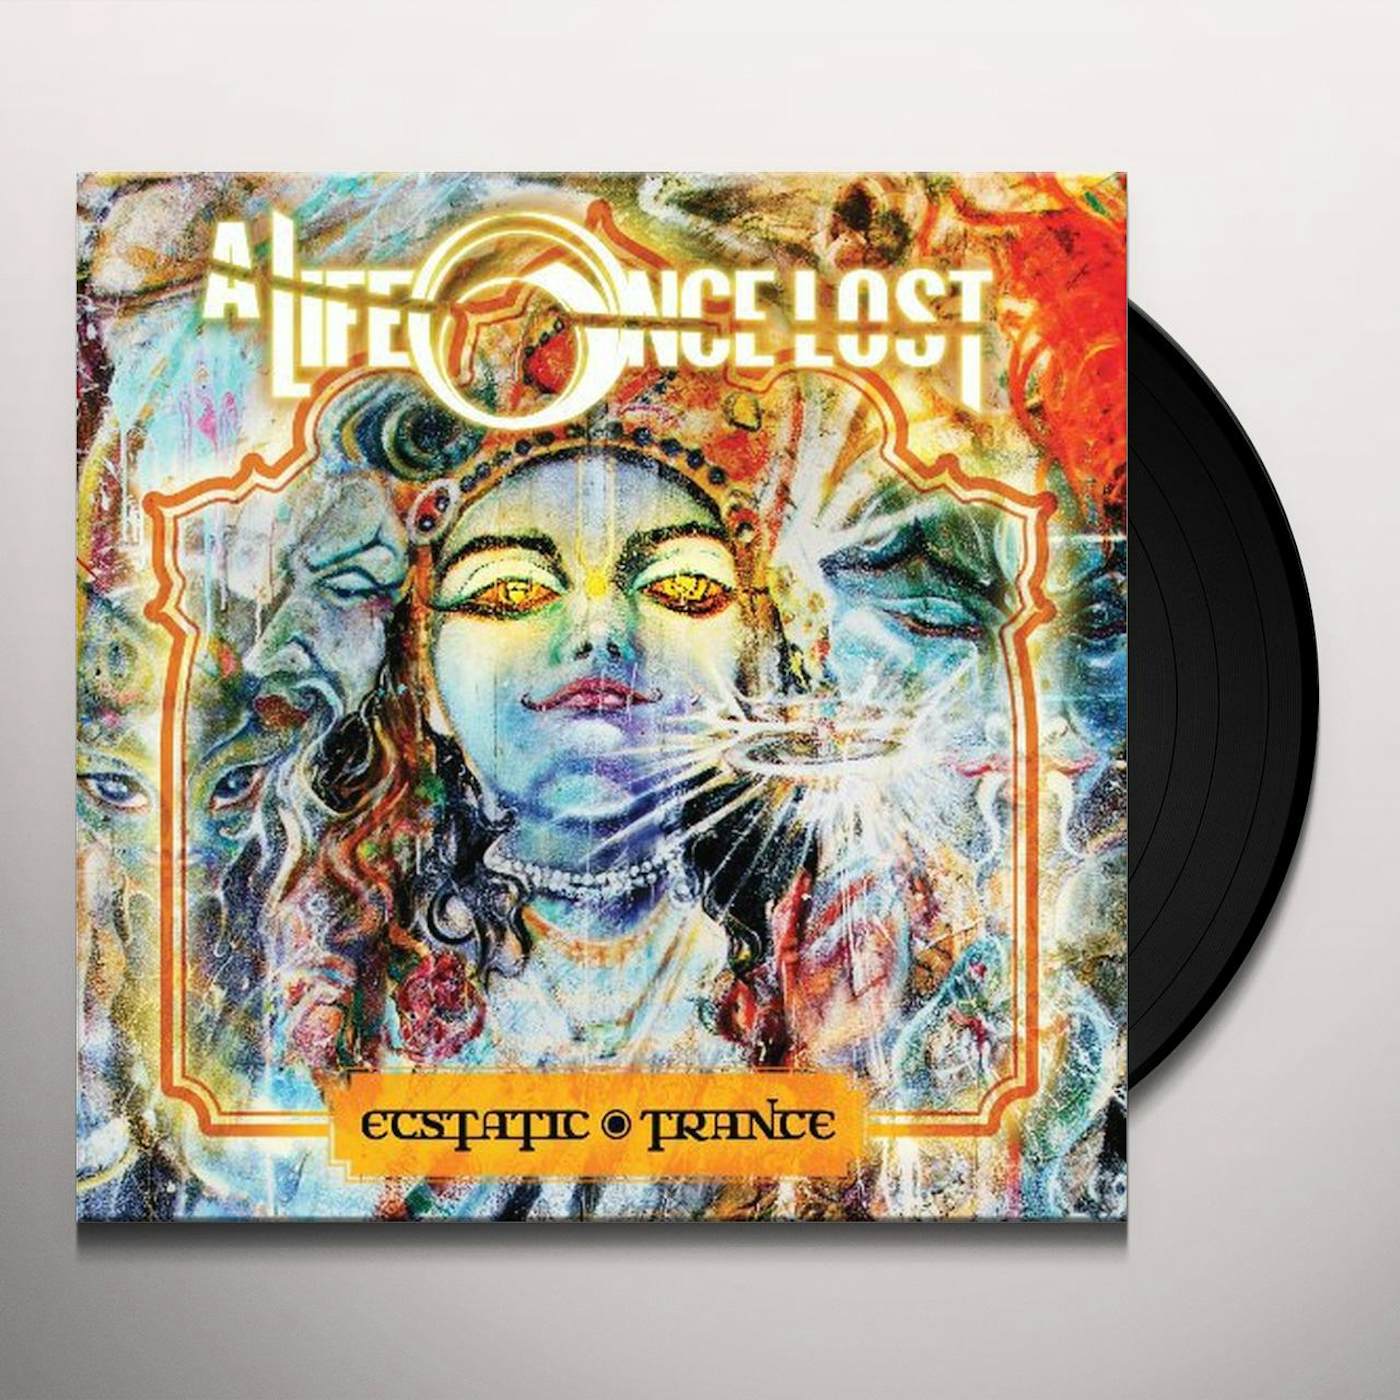 A Life Once Lost Ecstatic Trance Vinyl Record